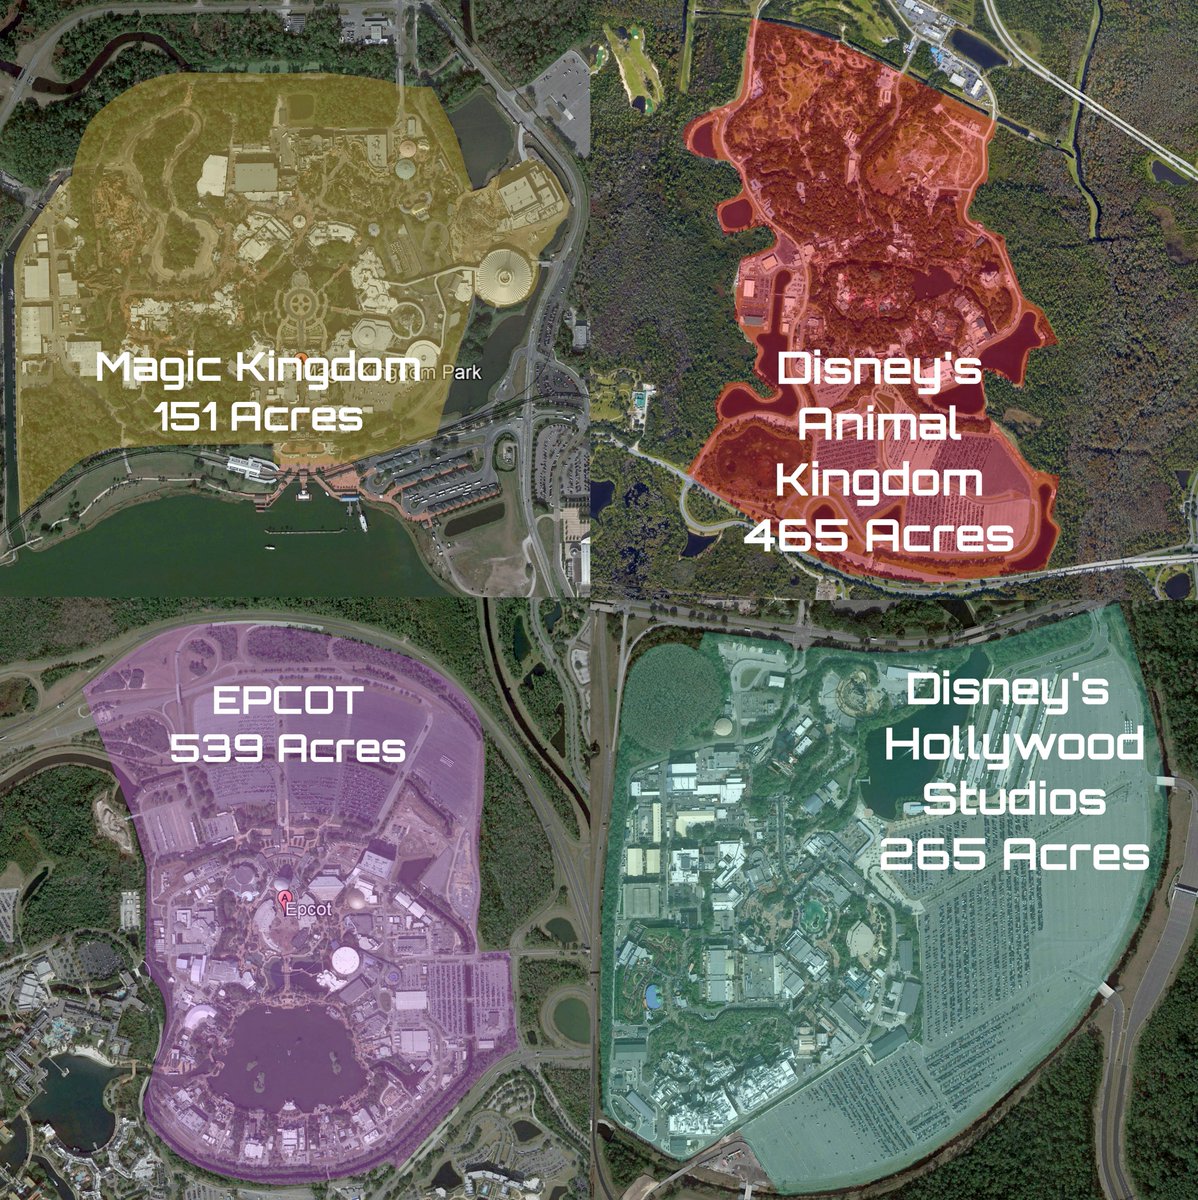  #EpicUniverse WDW: DHS is actually around 101 Acres, like IOA, rest is mostly parking or water management. So DHS is 100Acres, MK is 151 Acres of park (theres a reason its got 90K capacity). So treating MK like the other 3, 151Park+140 TTC means 291Acres of themepark